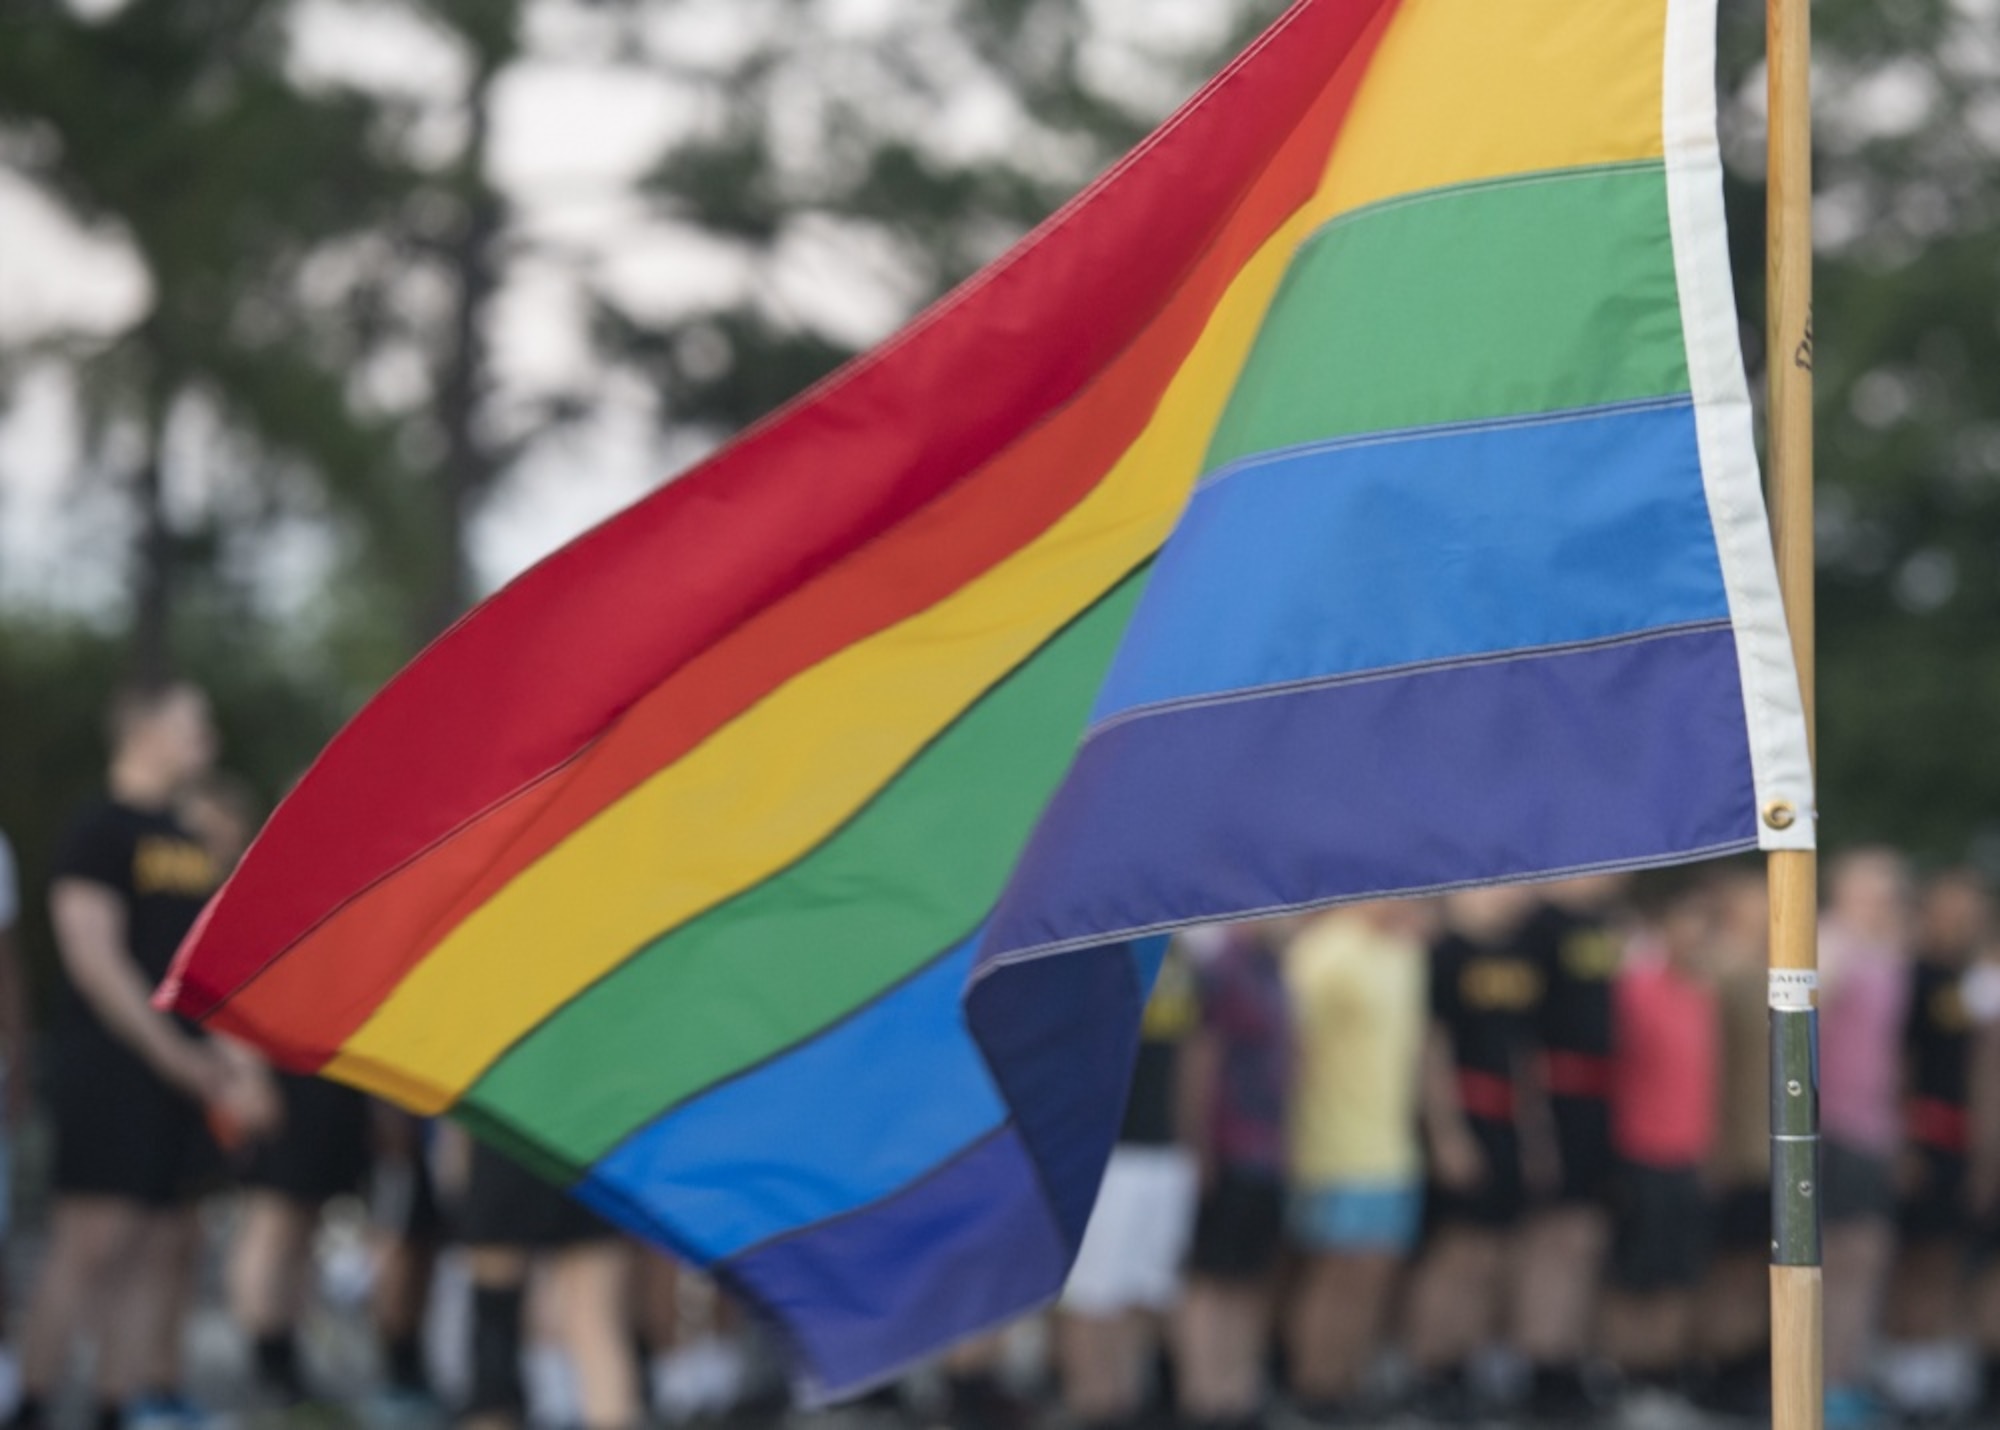 Celebrating and recognizing the diversity of both civilian and service members across the Department of Defense, June is Pride Month. The rainbow flag represents the diversity and social movement of LGBTQ community. (U.S. Air Force photo/Airman 1st Class Monica Roybal)